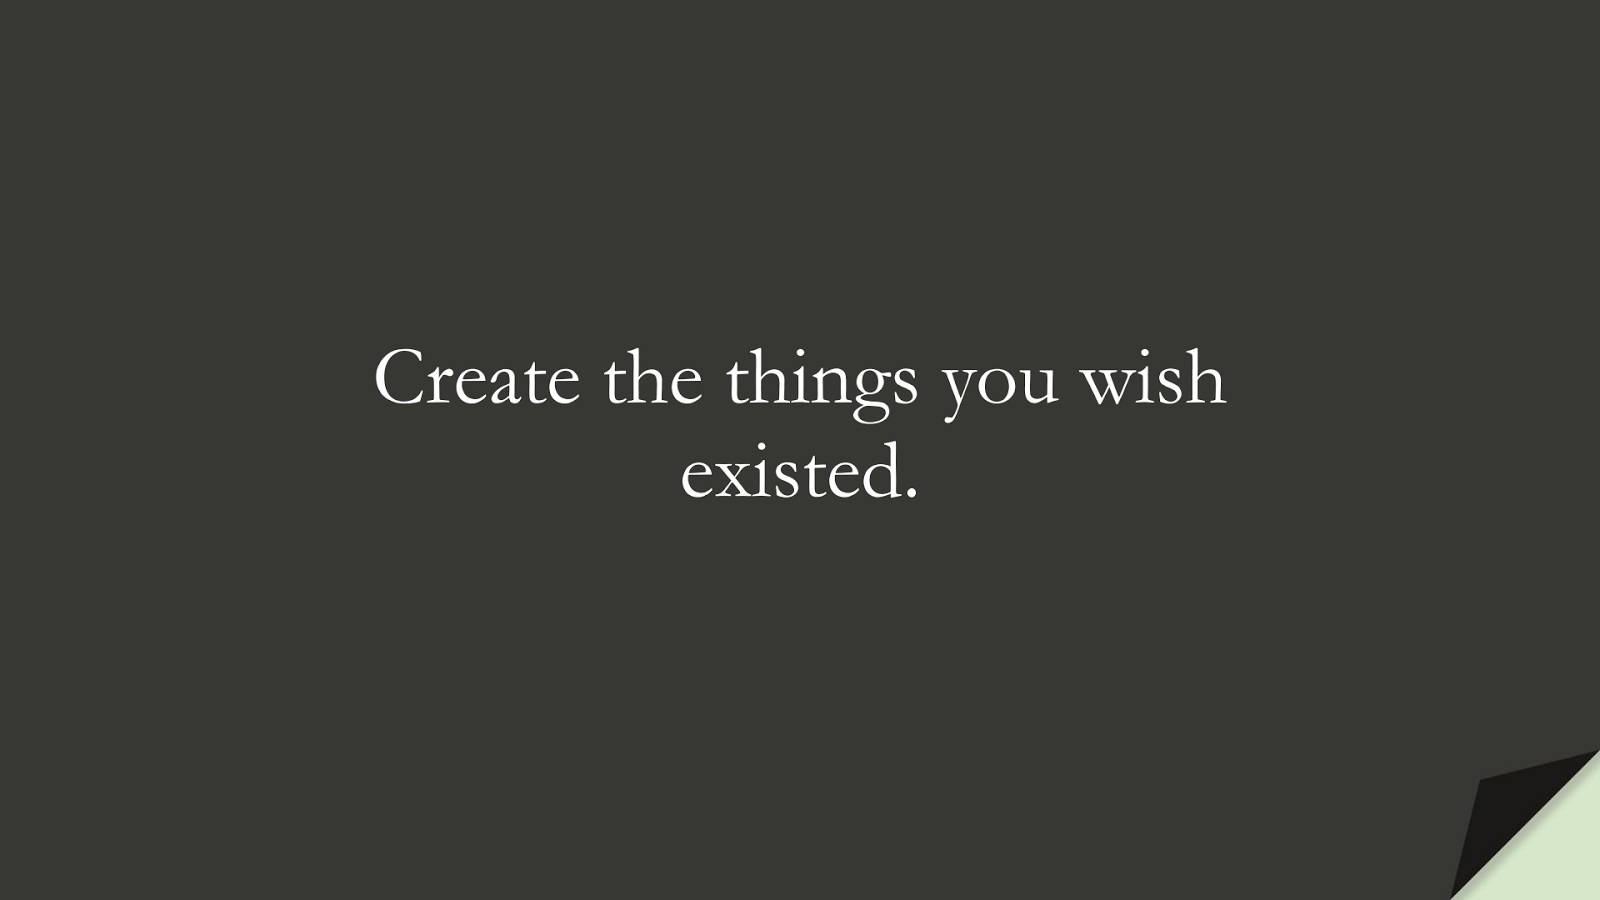 Create the things you wish existed.FALSE